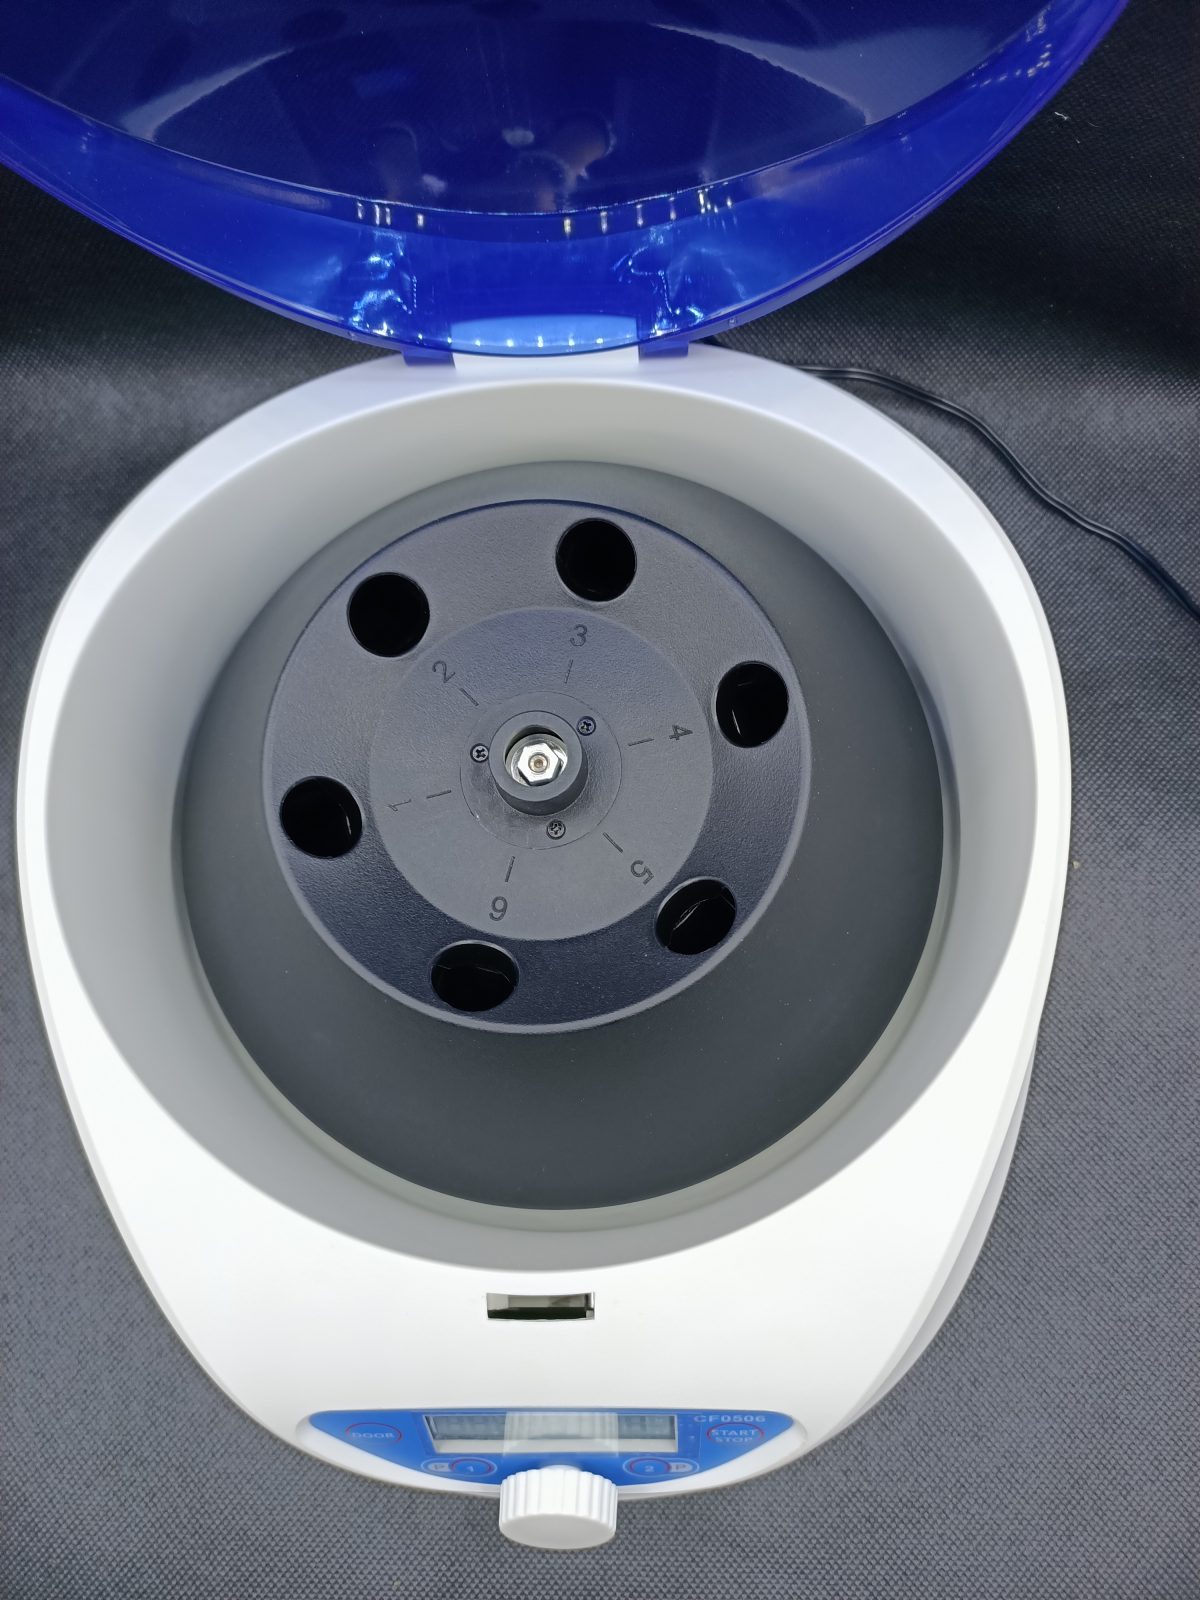 Portable Centrifuge machine with LCD screen